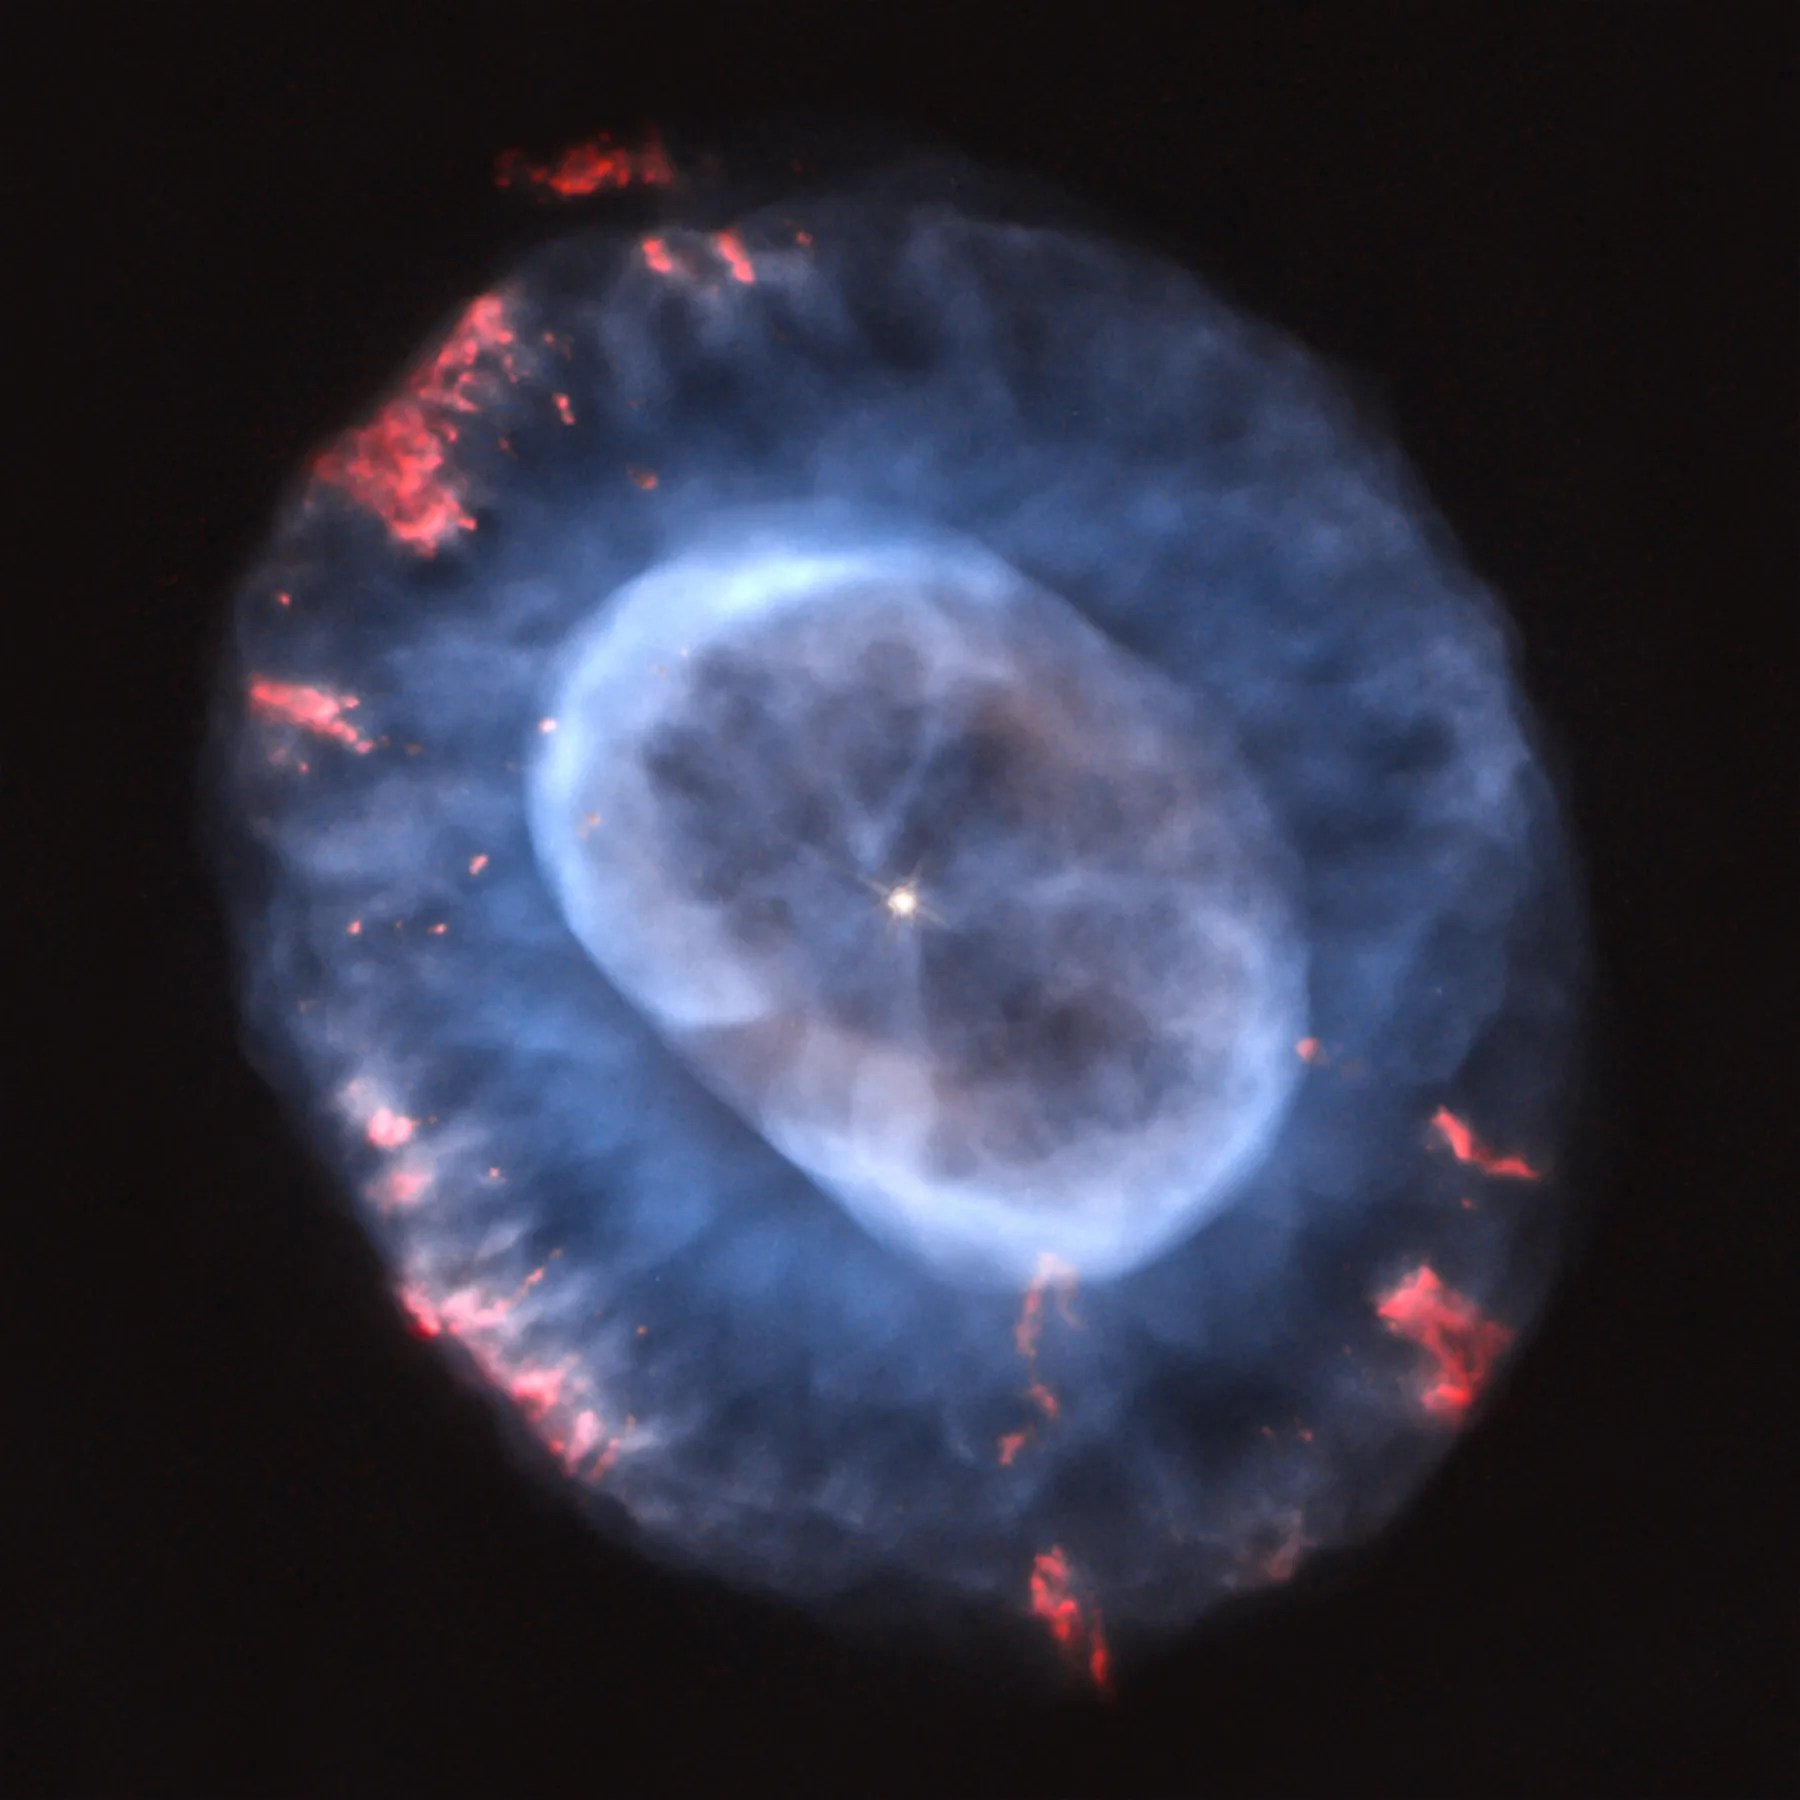 Light blue dust and gas forms an egg shaped shell surrounding a bright white star in the center. There is an outer shell as well, also light blue, with some pink on the edges.